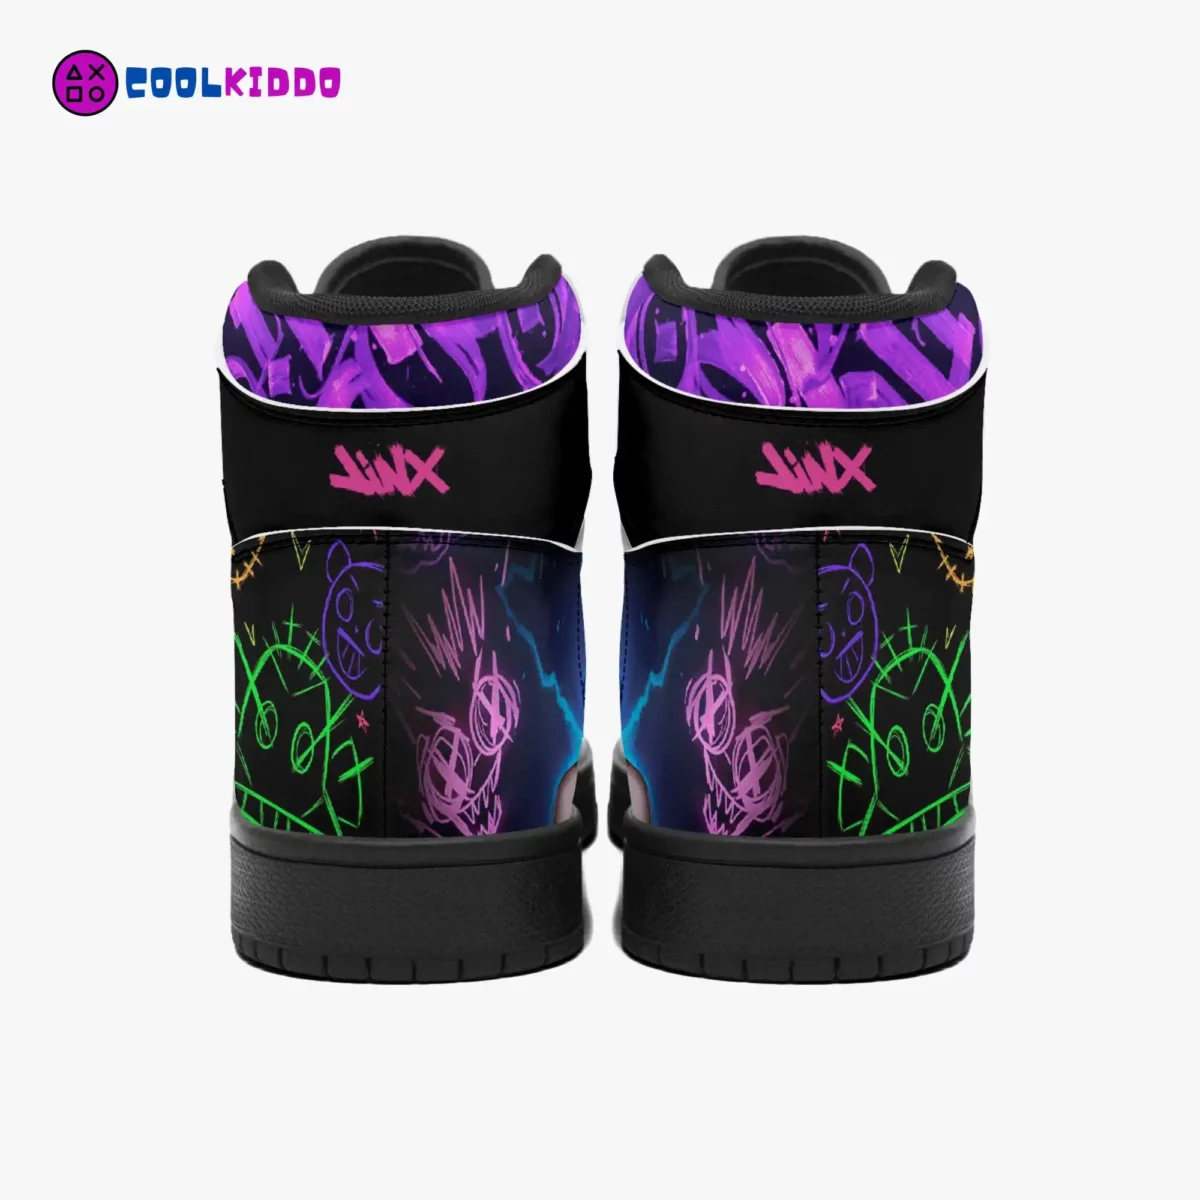 Jinx Character from ARCANE LoL High-Top Leather Sneakers, Unisex Casual Shoes for any season Cool Kiddo 20